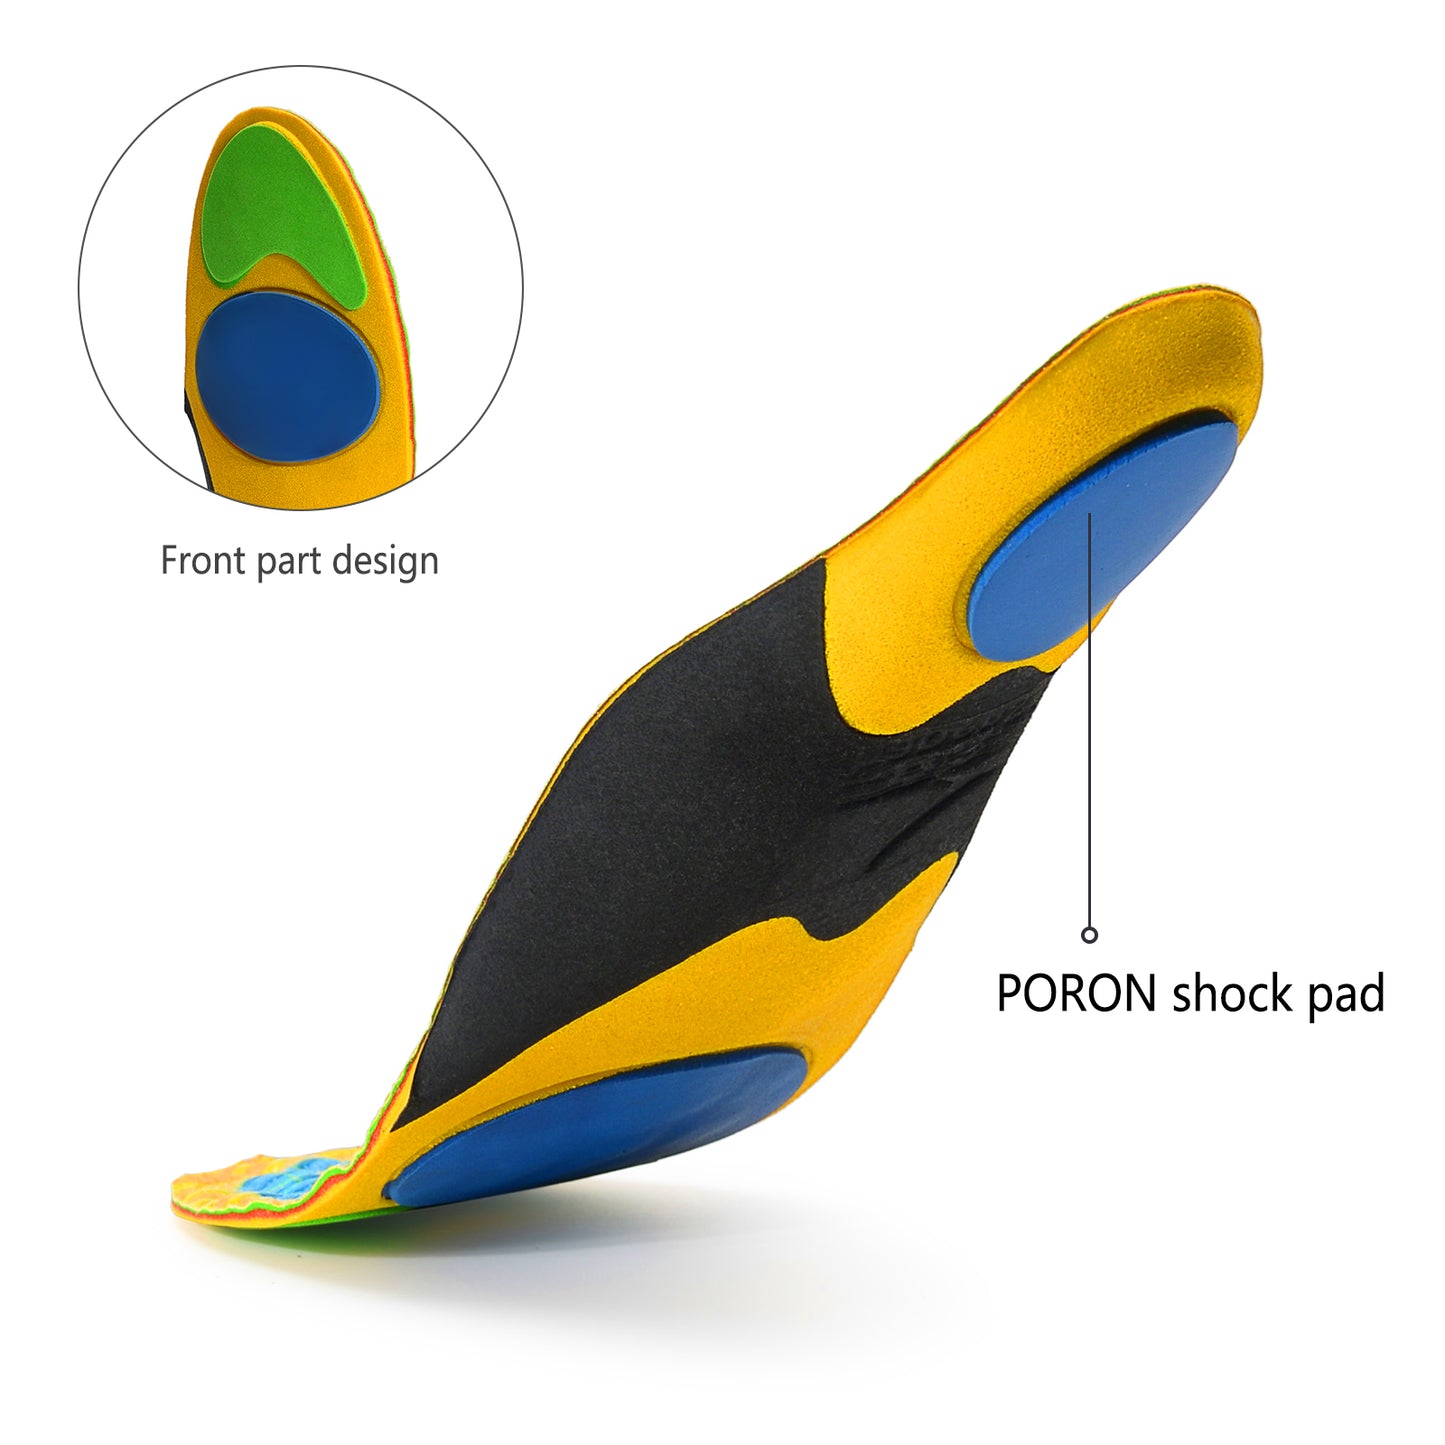 Hapenss Badminton Series Shoe Insole, Arch Support Insoles For Men Women, Orthotic Inserts For Plantar Fasciitis Relief, Best Sports Insole For Standing All Day